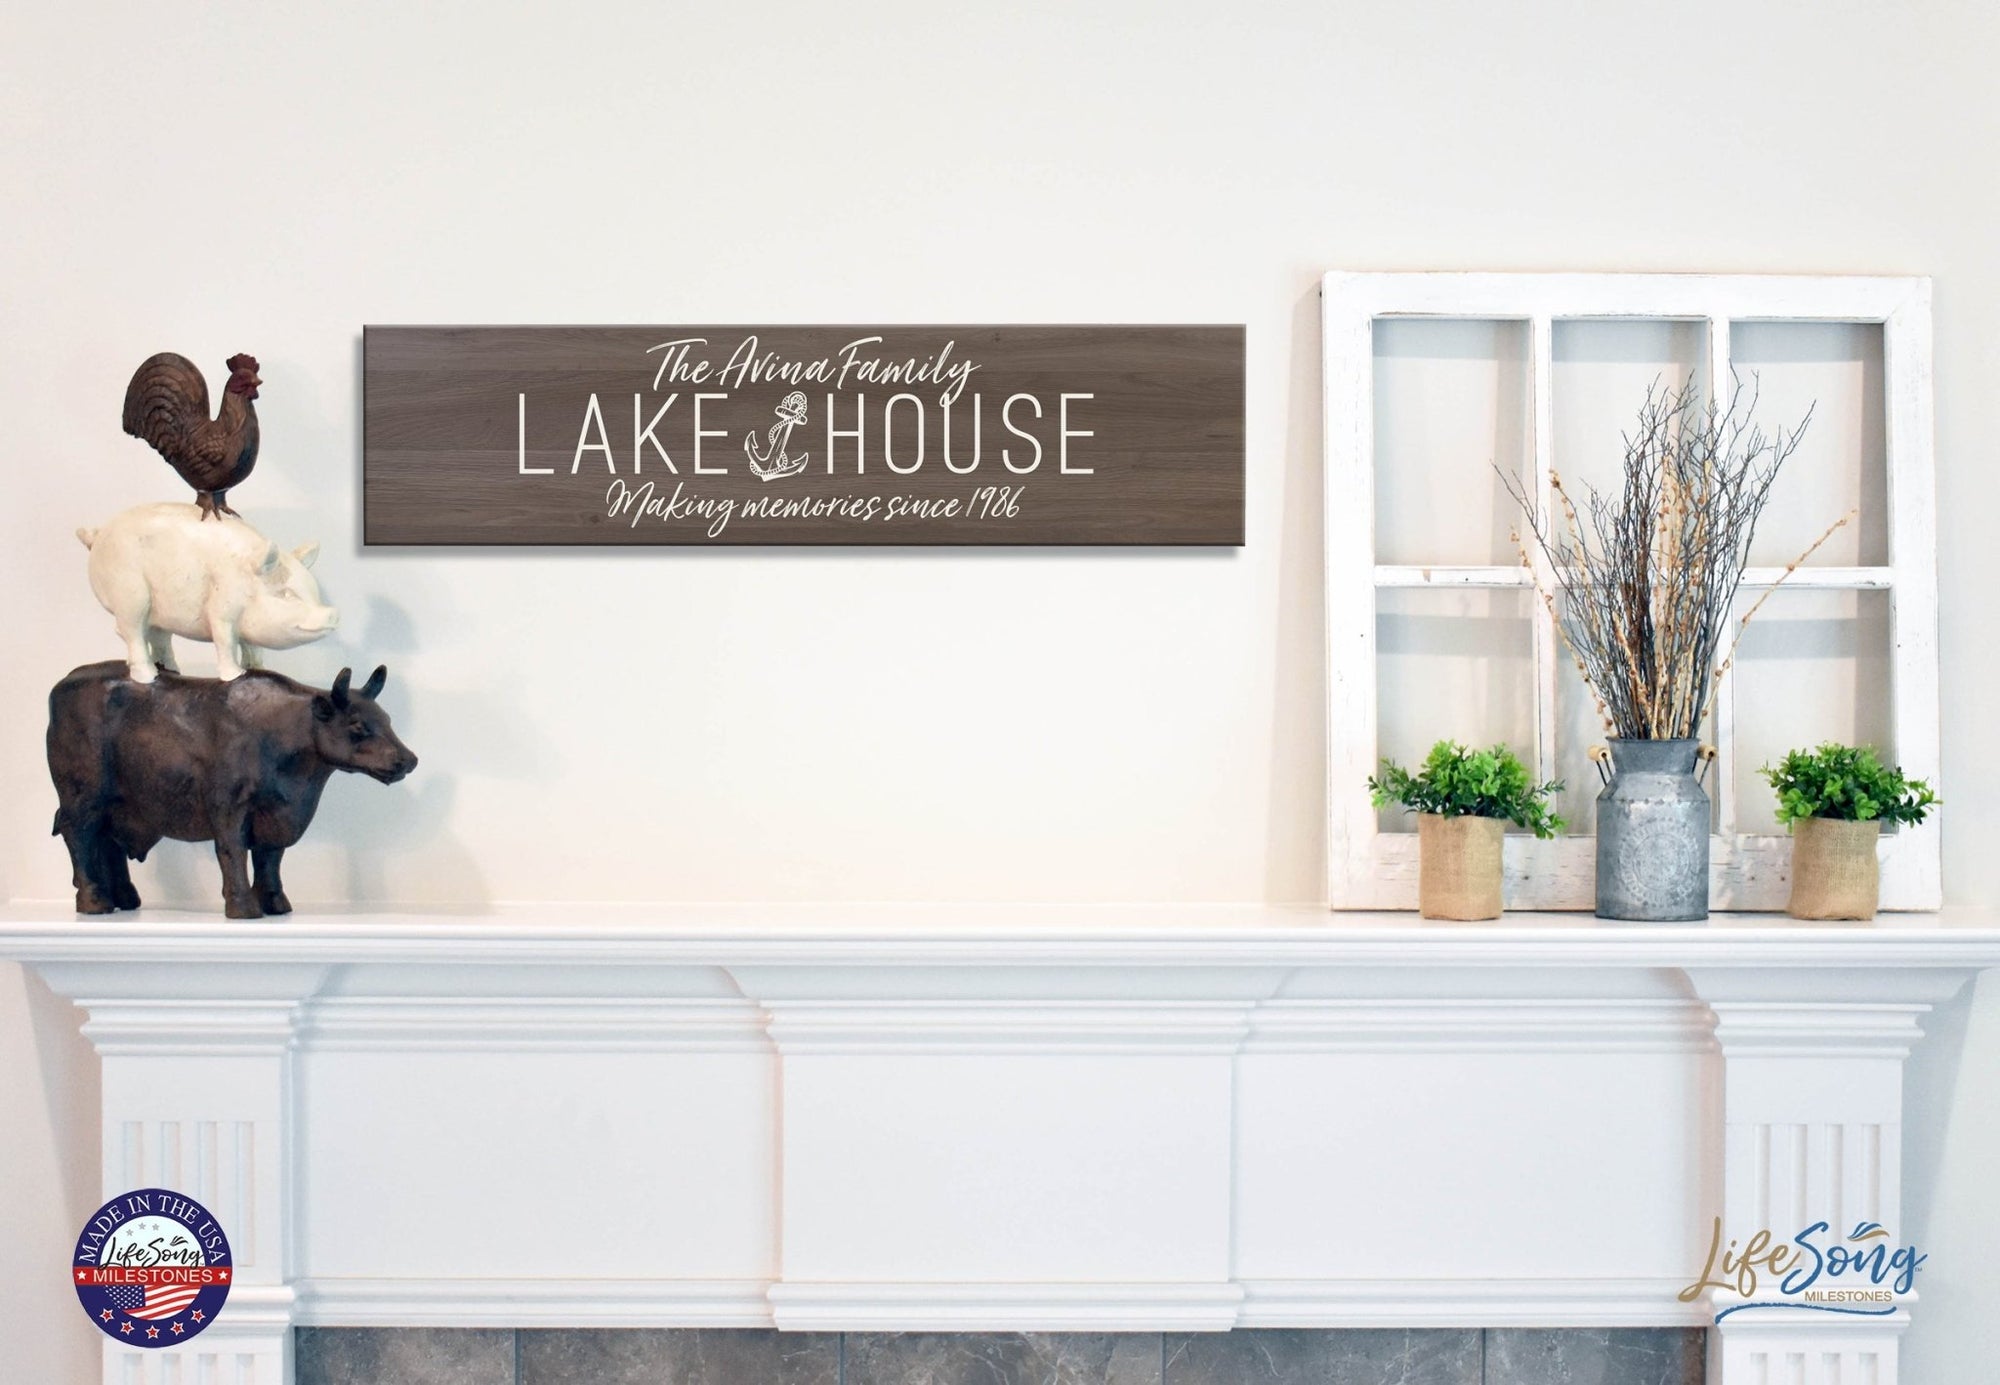 Personalized Inspirational Modern Family Beach House Wooden Wall Plaque 10x40 – Lake House (Anchor) - LifeSong Milestones